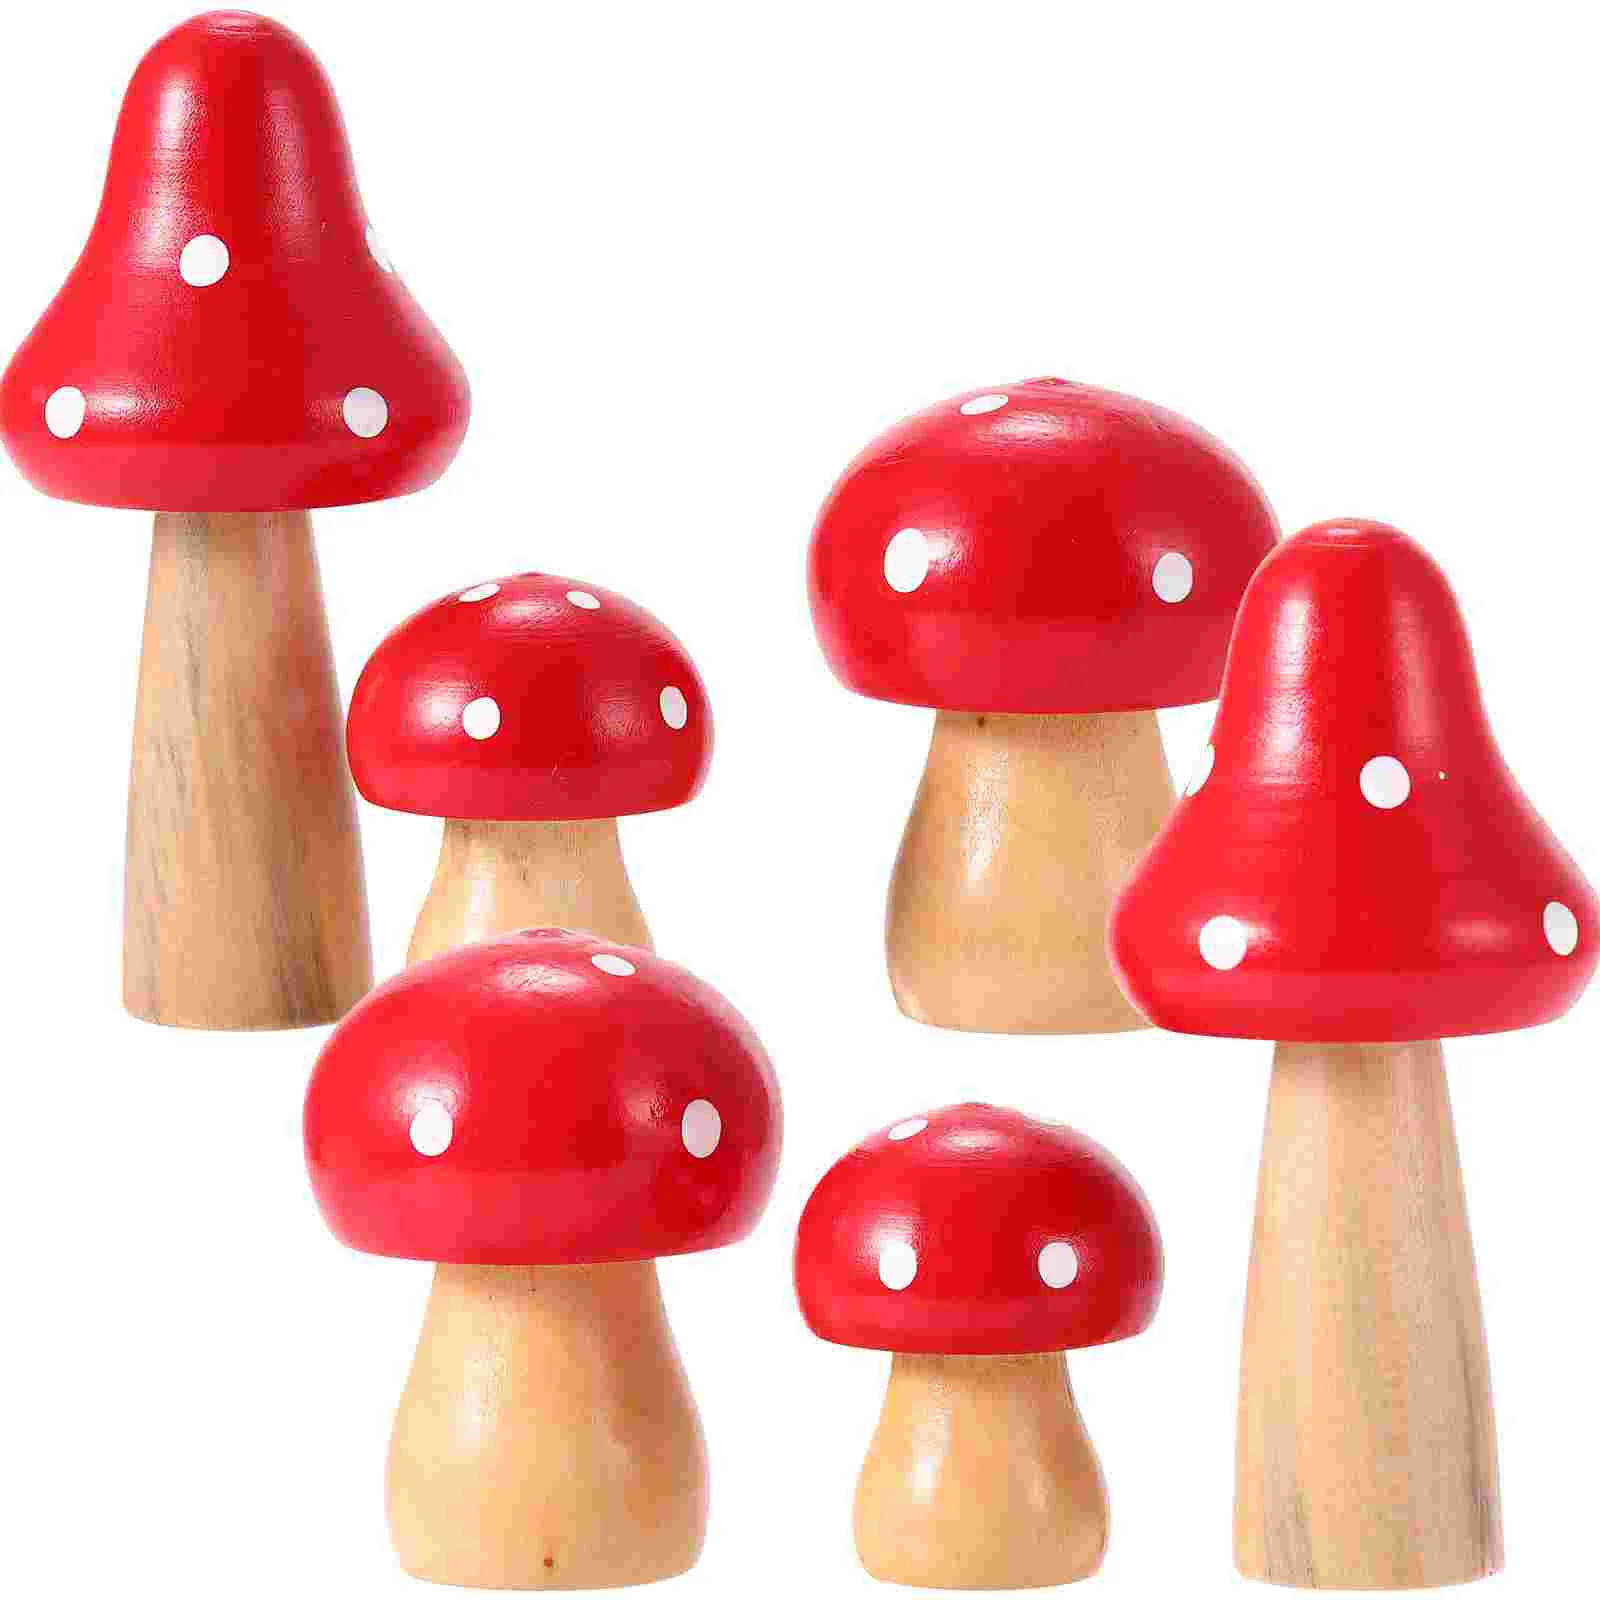 

6 Pcs Simulated Wooden Mushroom Outdoor Home Decor Mini Ornaments Toy Potted Moss Adornment Garden Shape Photography Prop